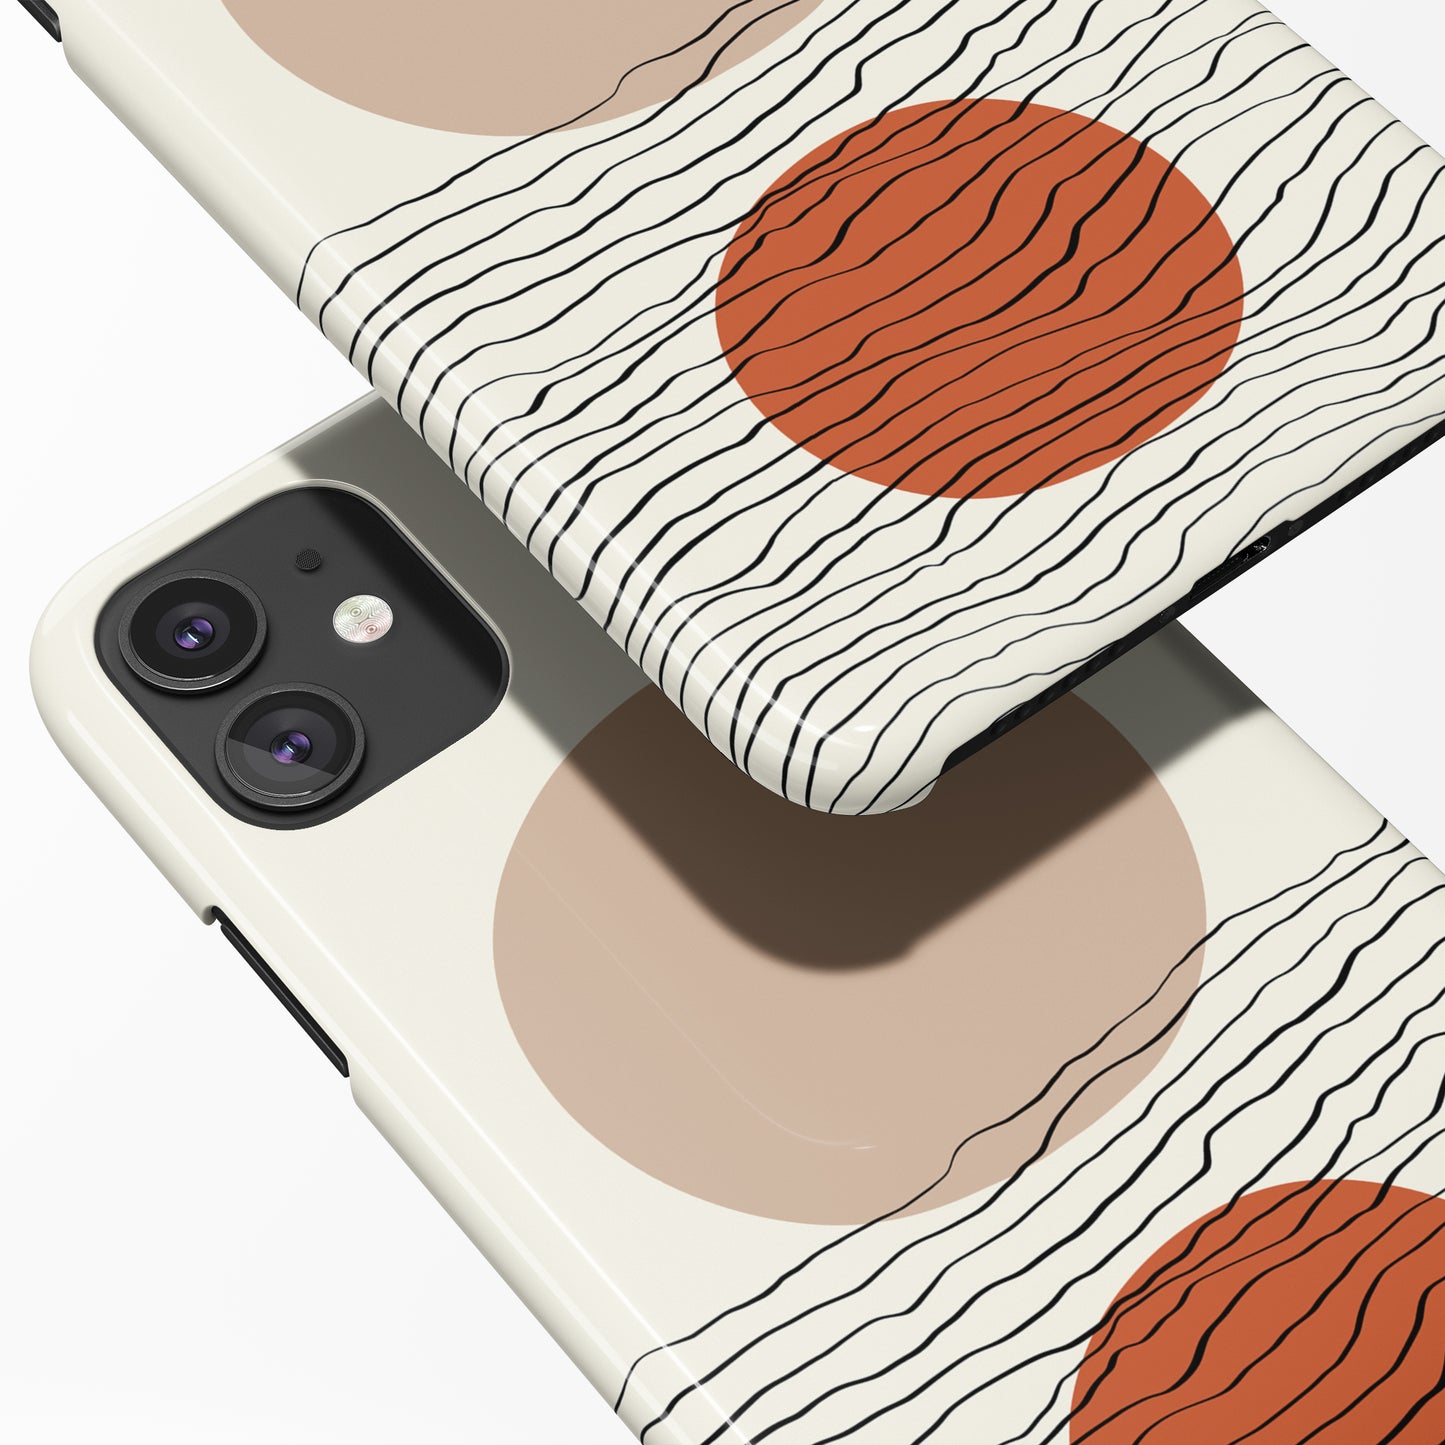 Beige Drawing iPhone Case 2